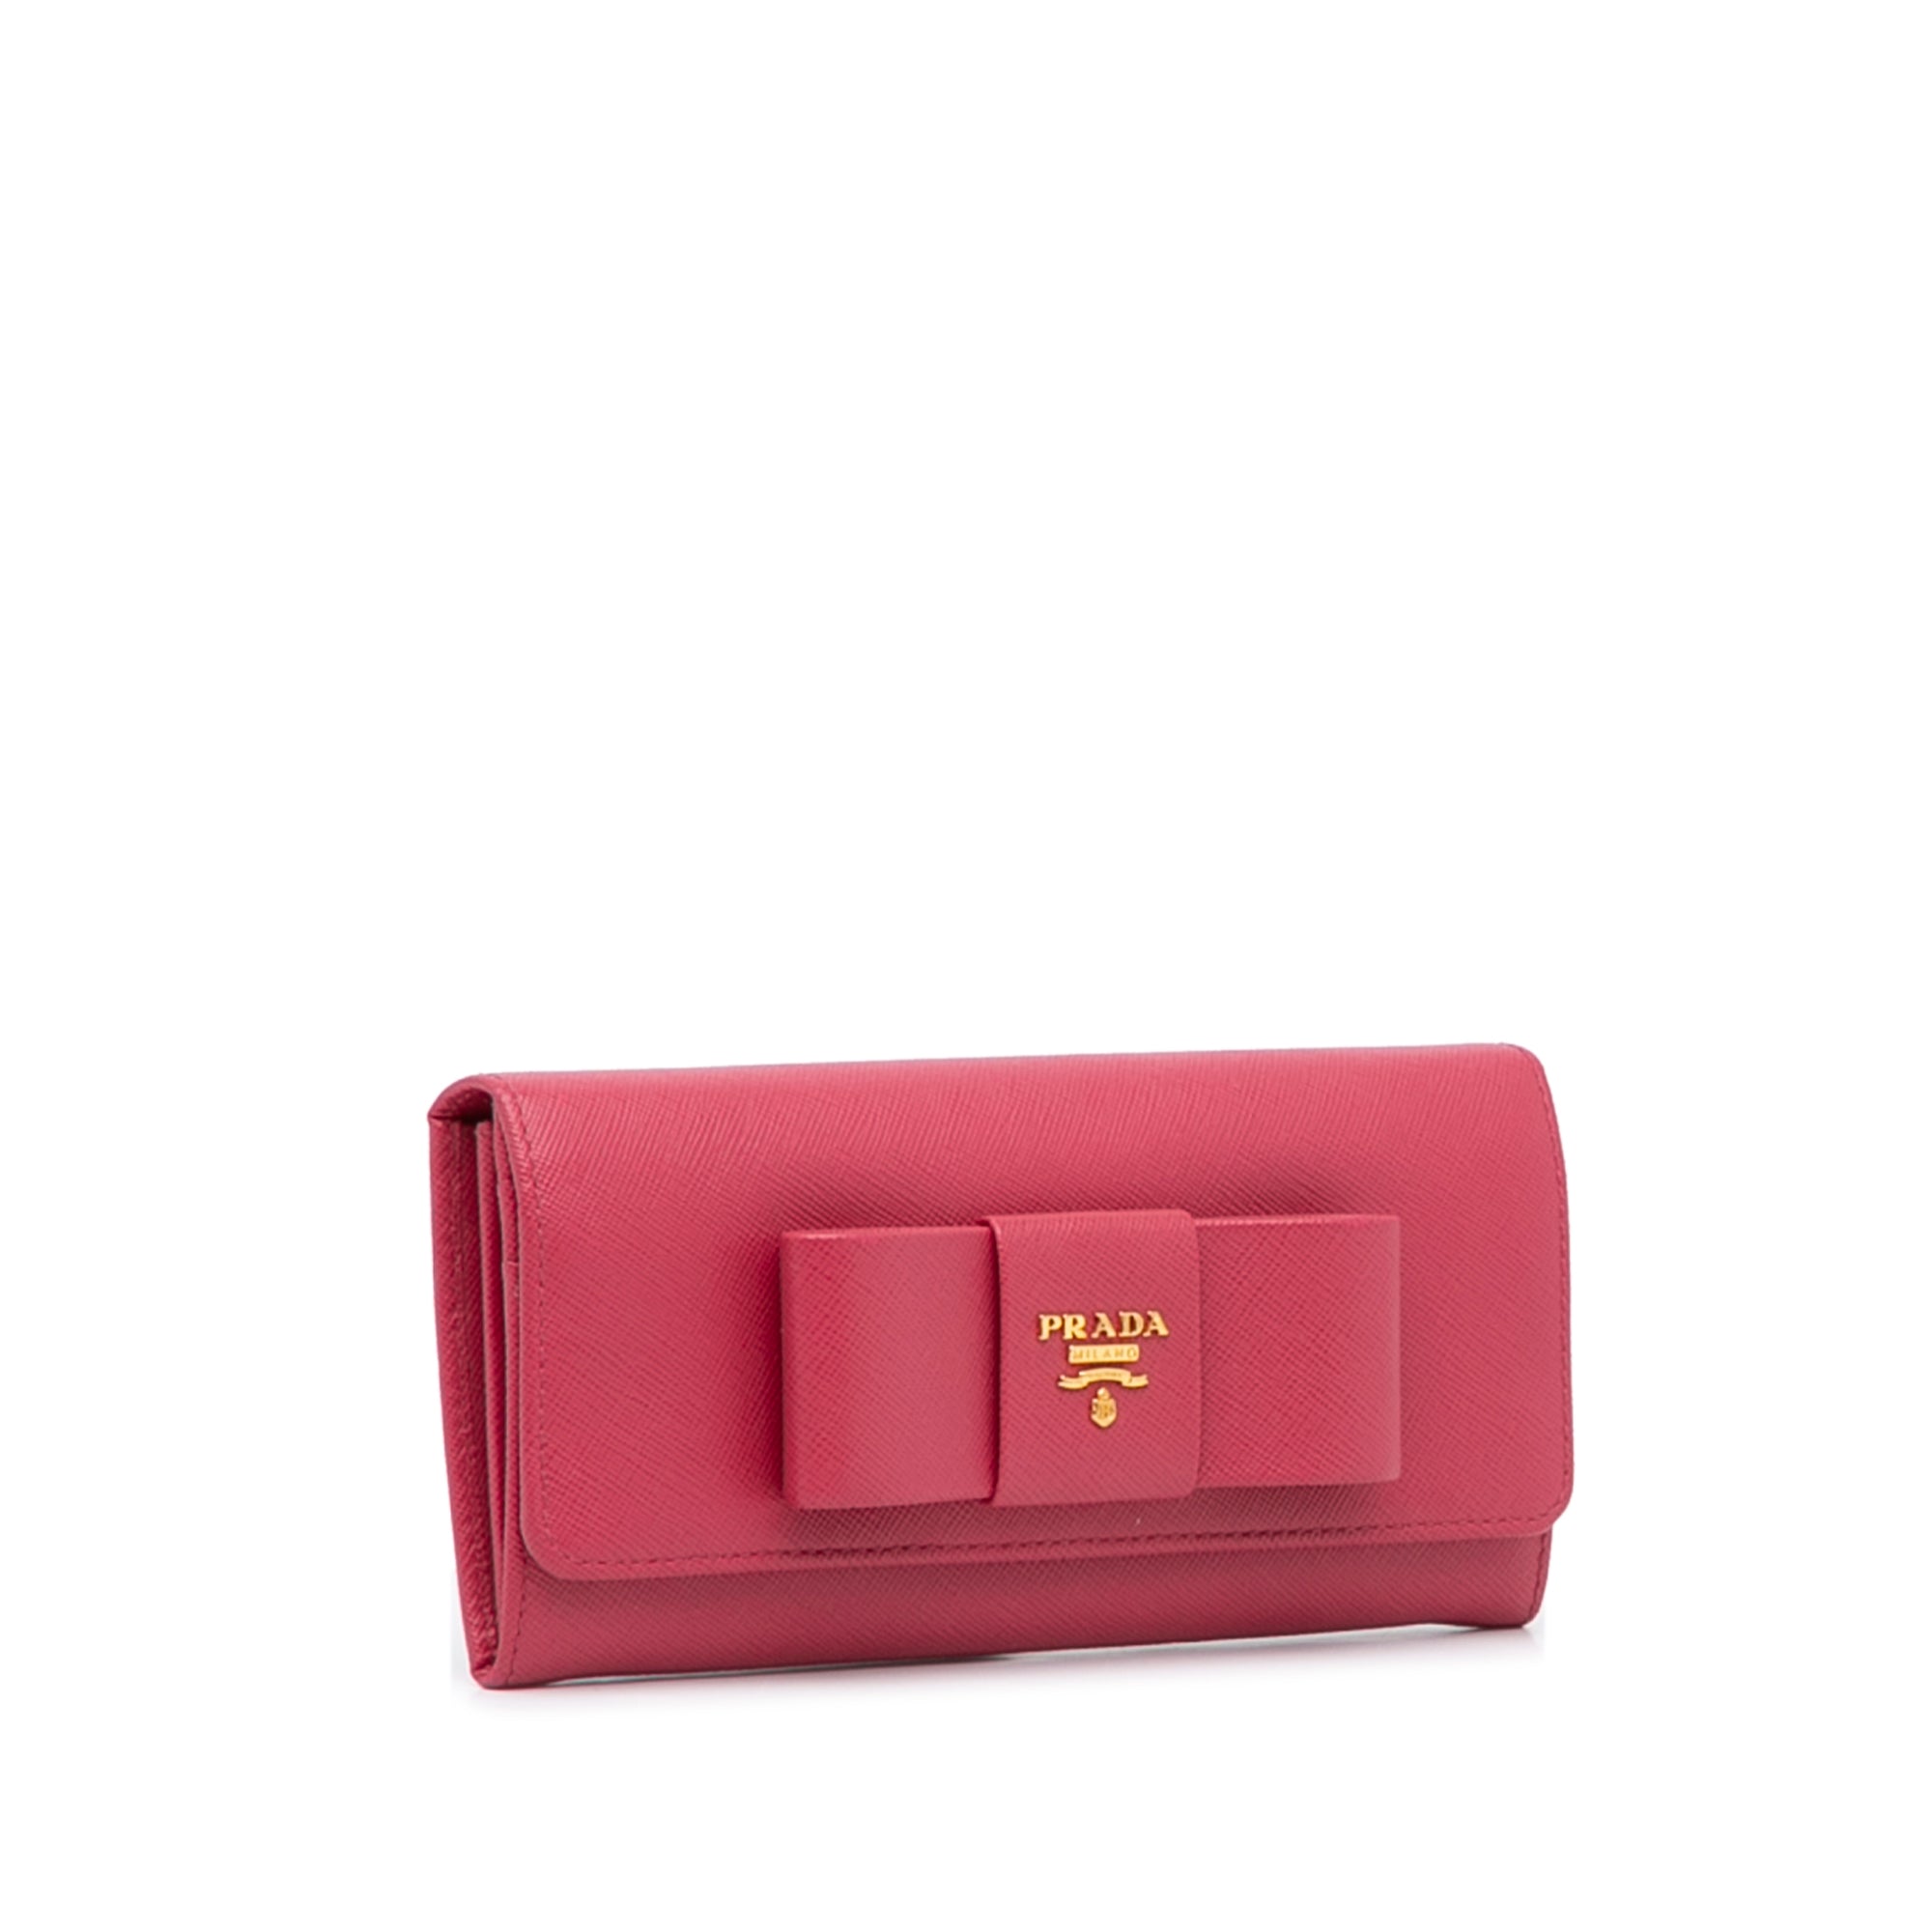 Prada Pink Saffiano Leather Bow Flap Wallet 22PRL1125 – Bagriculture